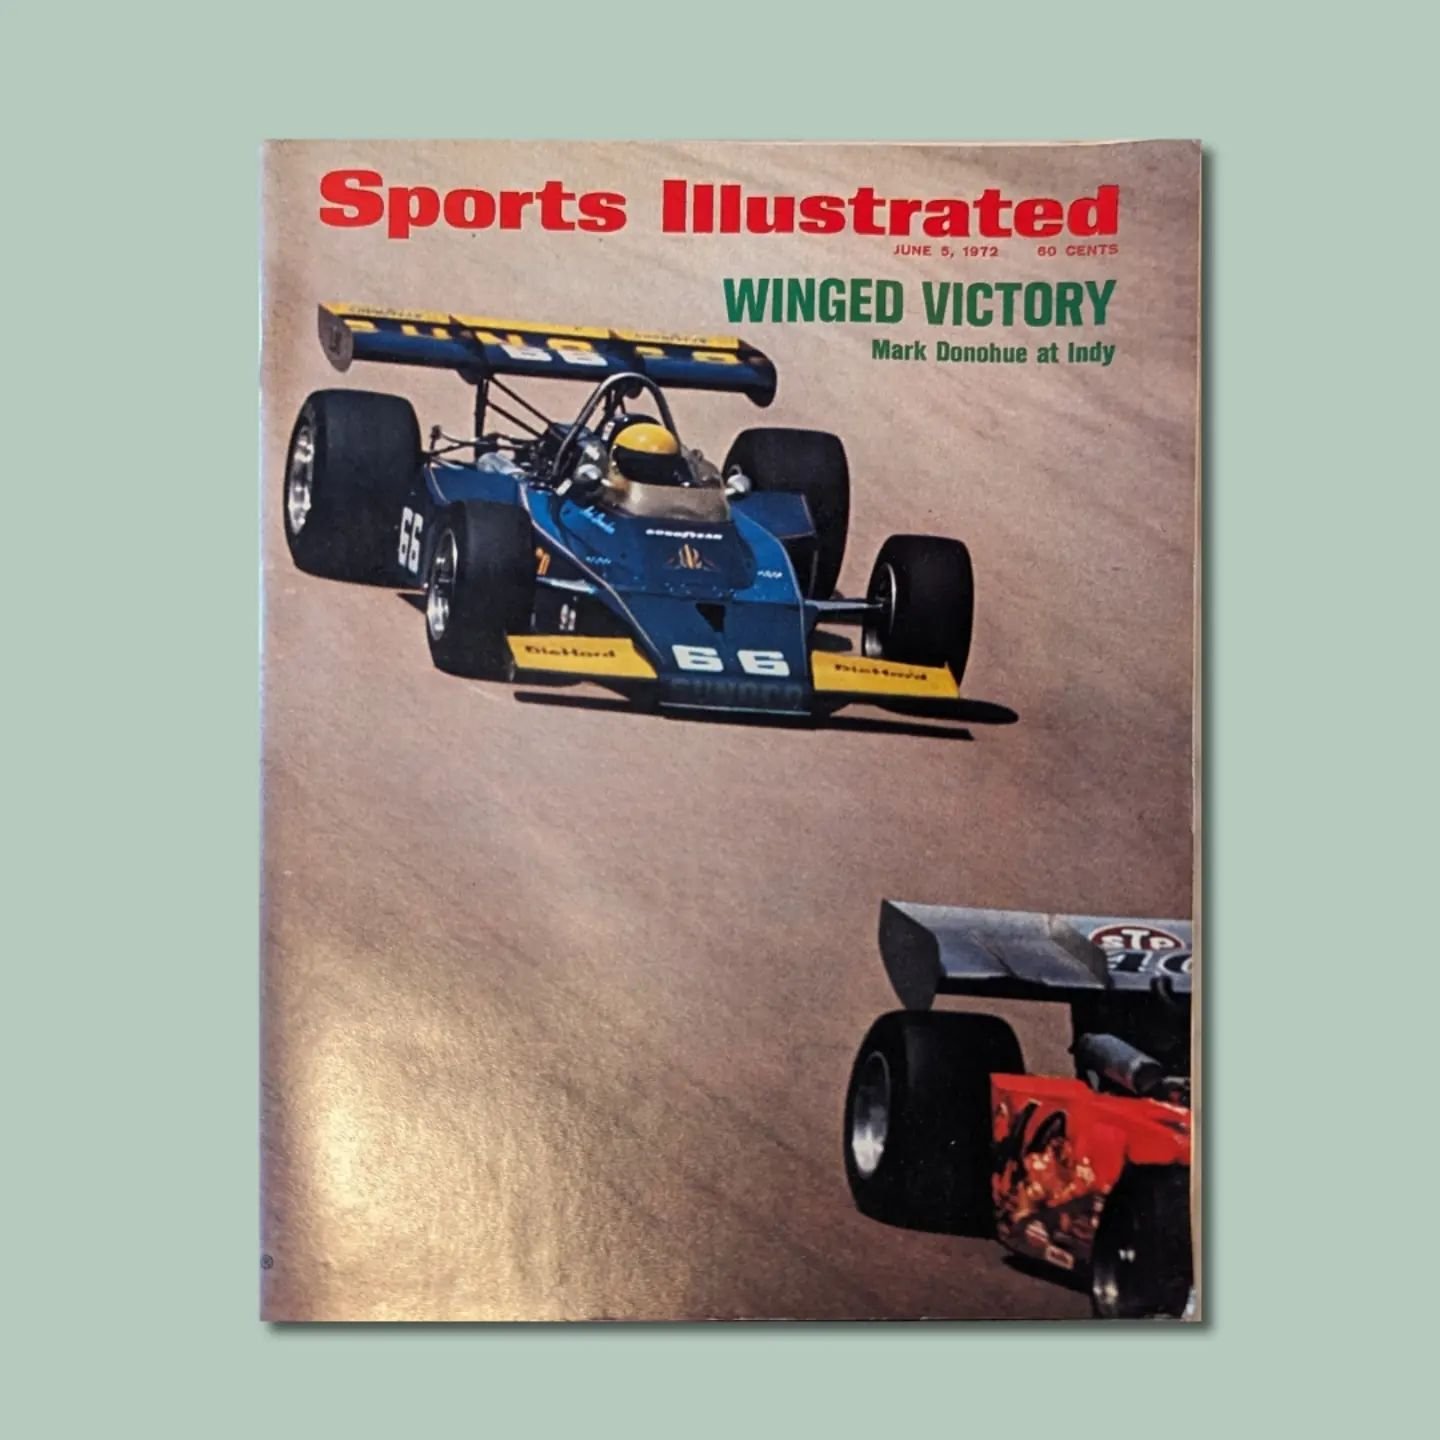 It's May! Which means we're smack dab in the middle of Sports Heaven.  Celebrate the competitors of yesteryear with these classic editions of Sports Illustrated.